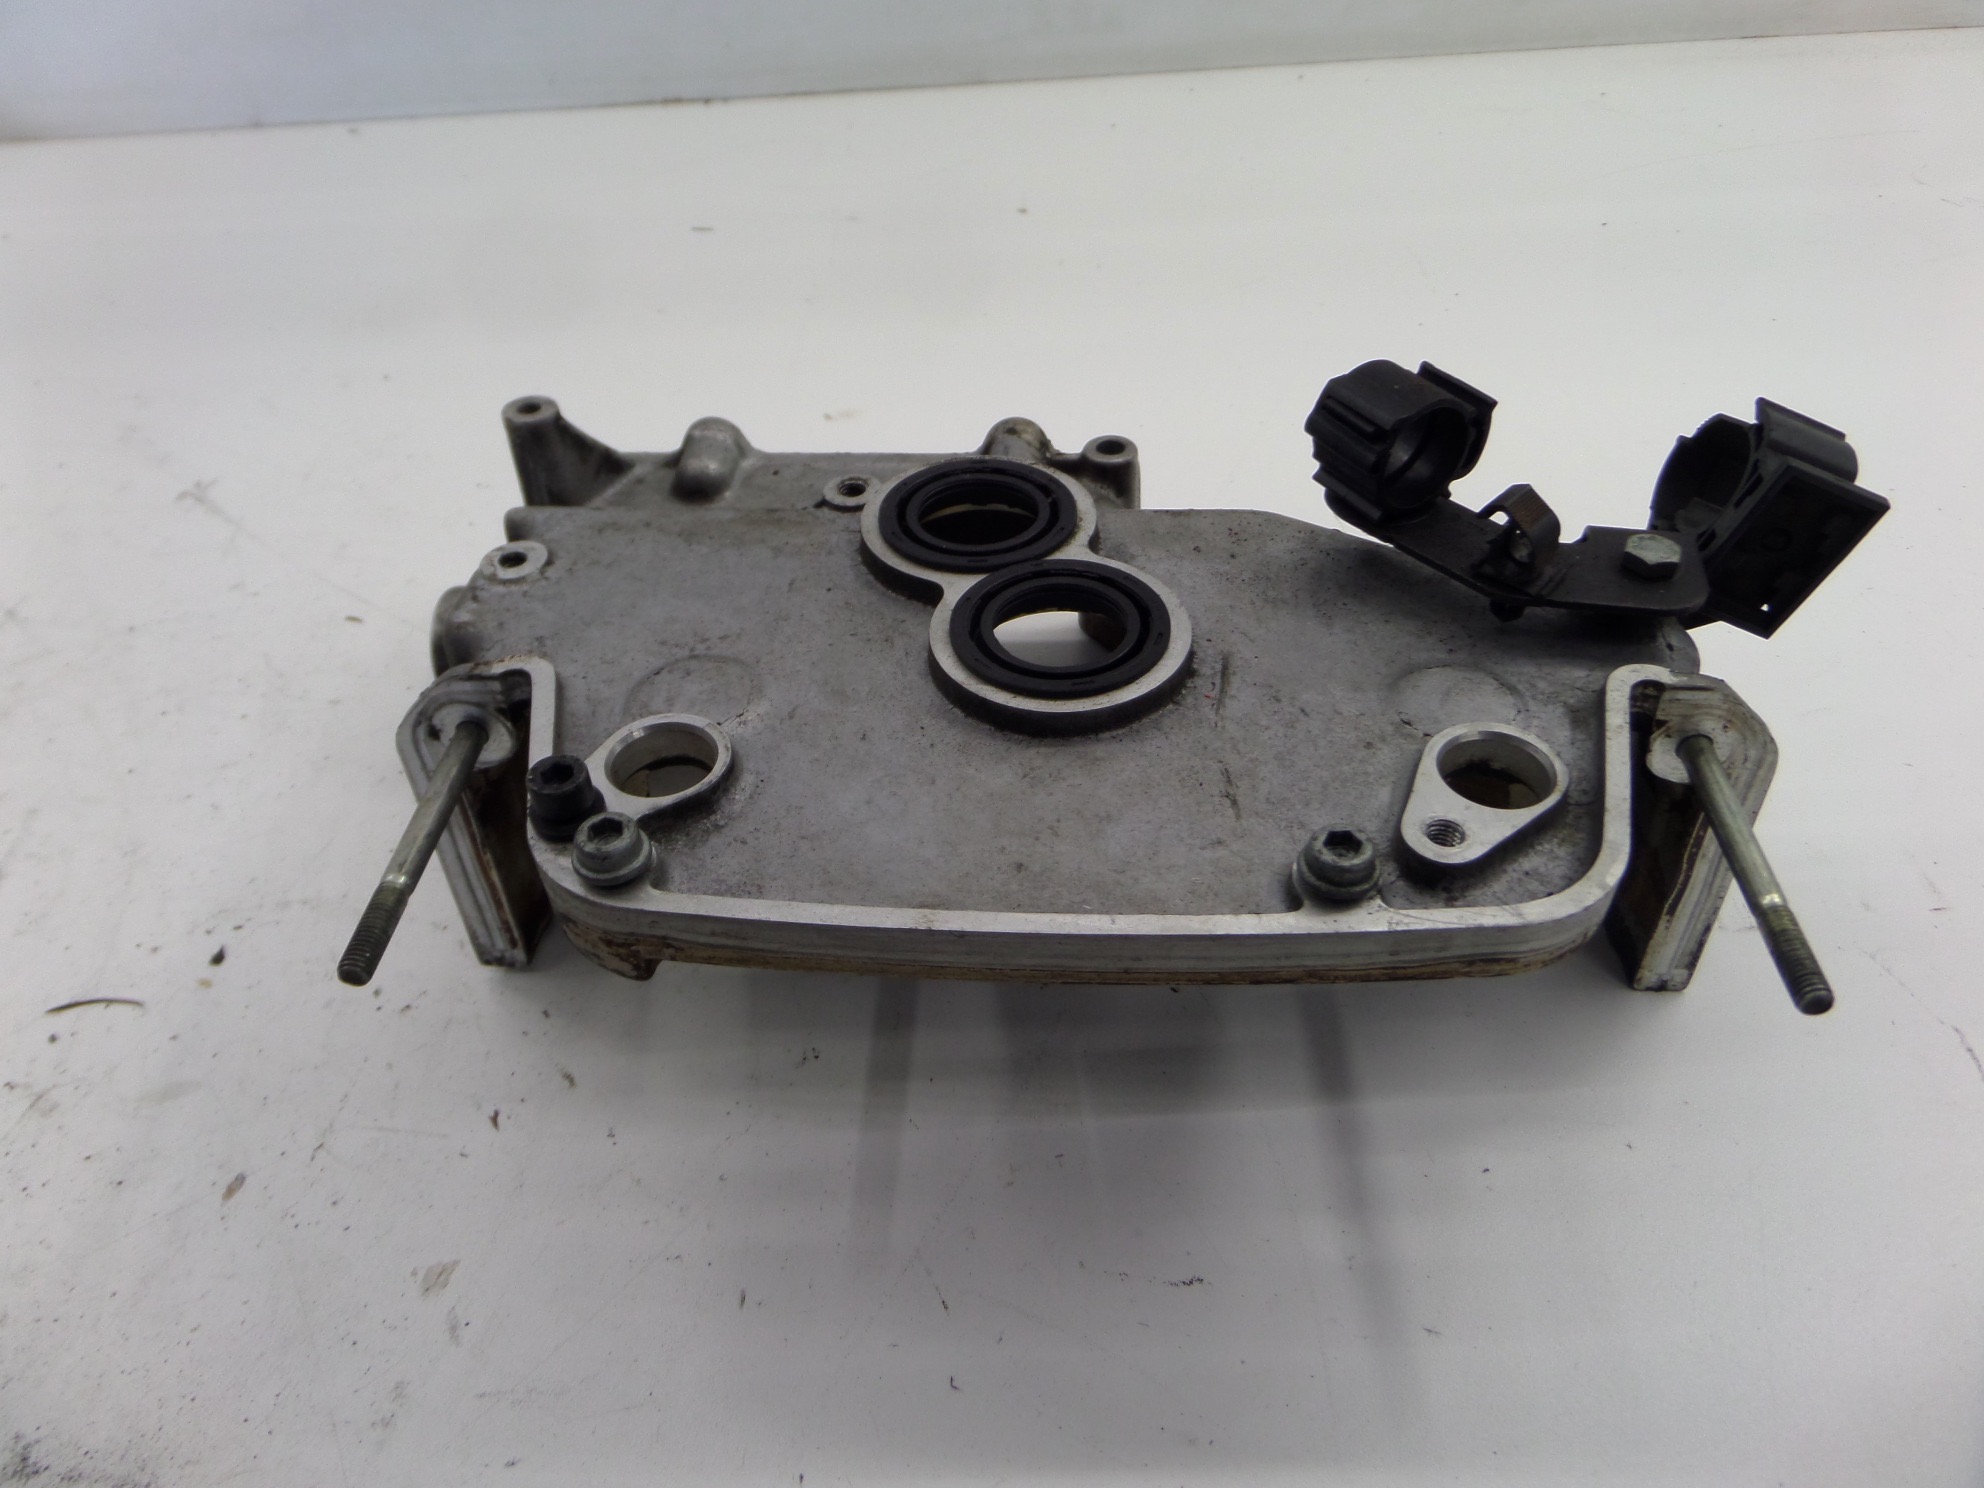 VW Eurovan Engine Timing Chain Cover VR6 2.8L T4 9903